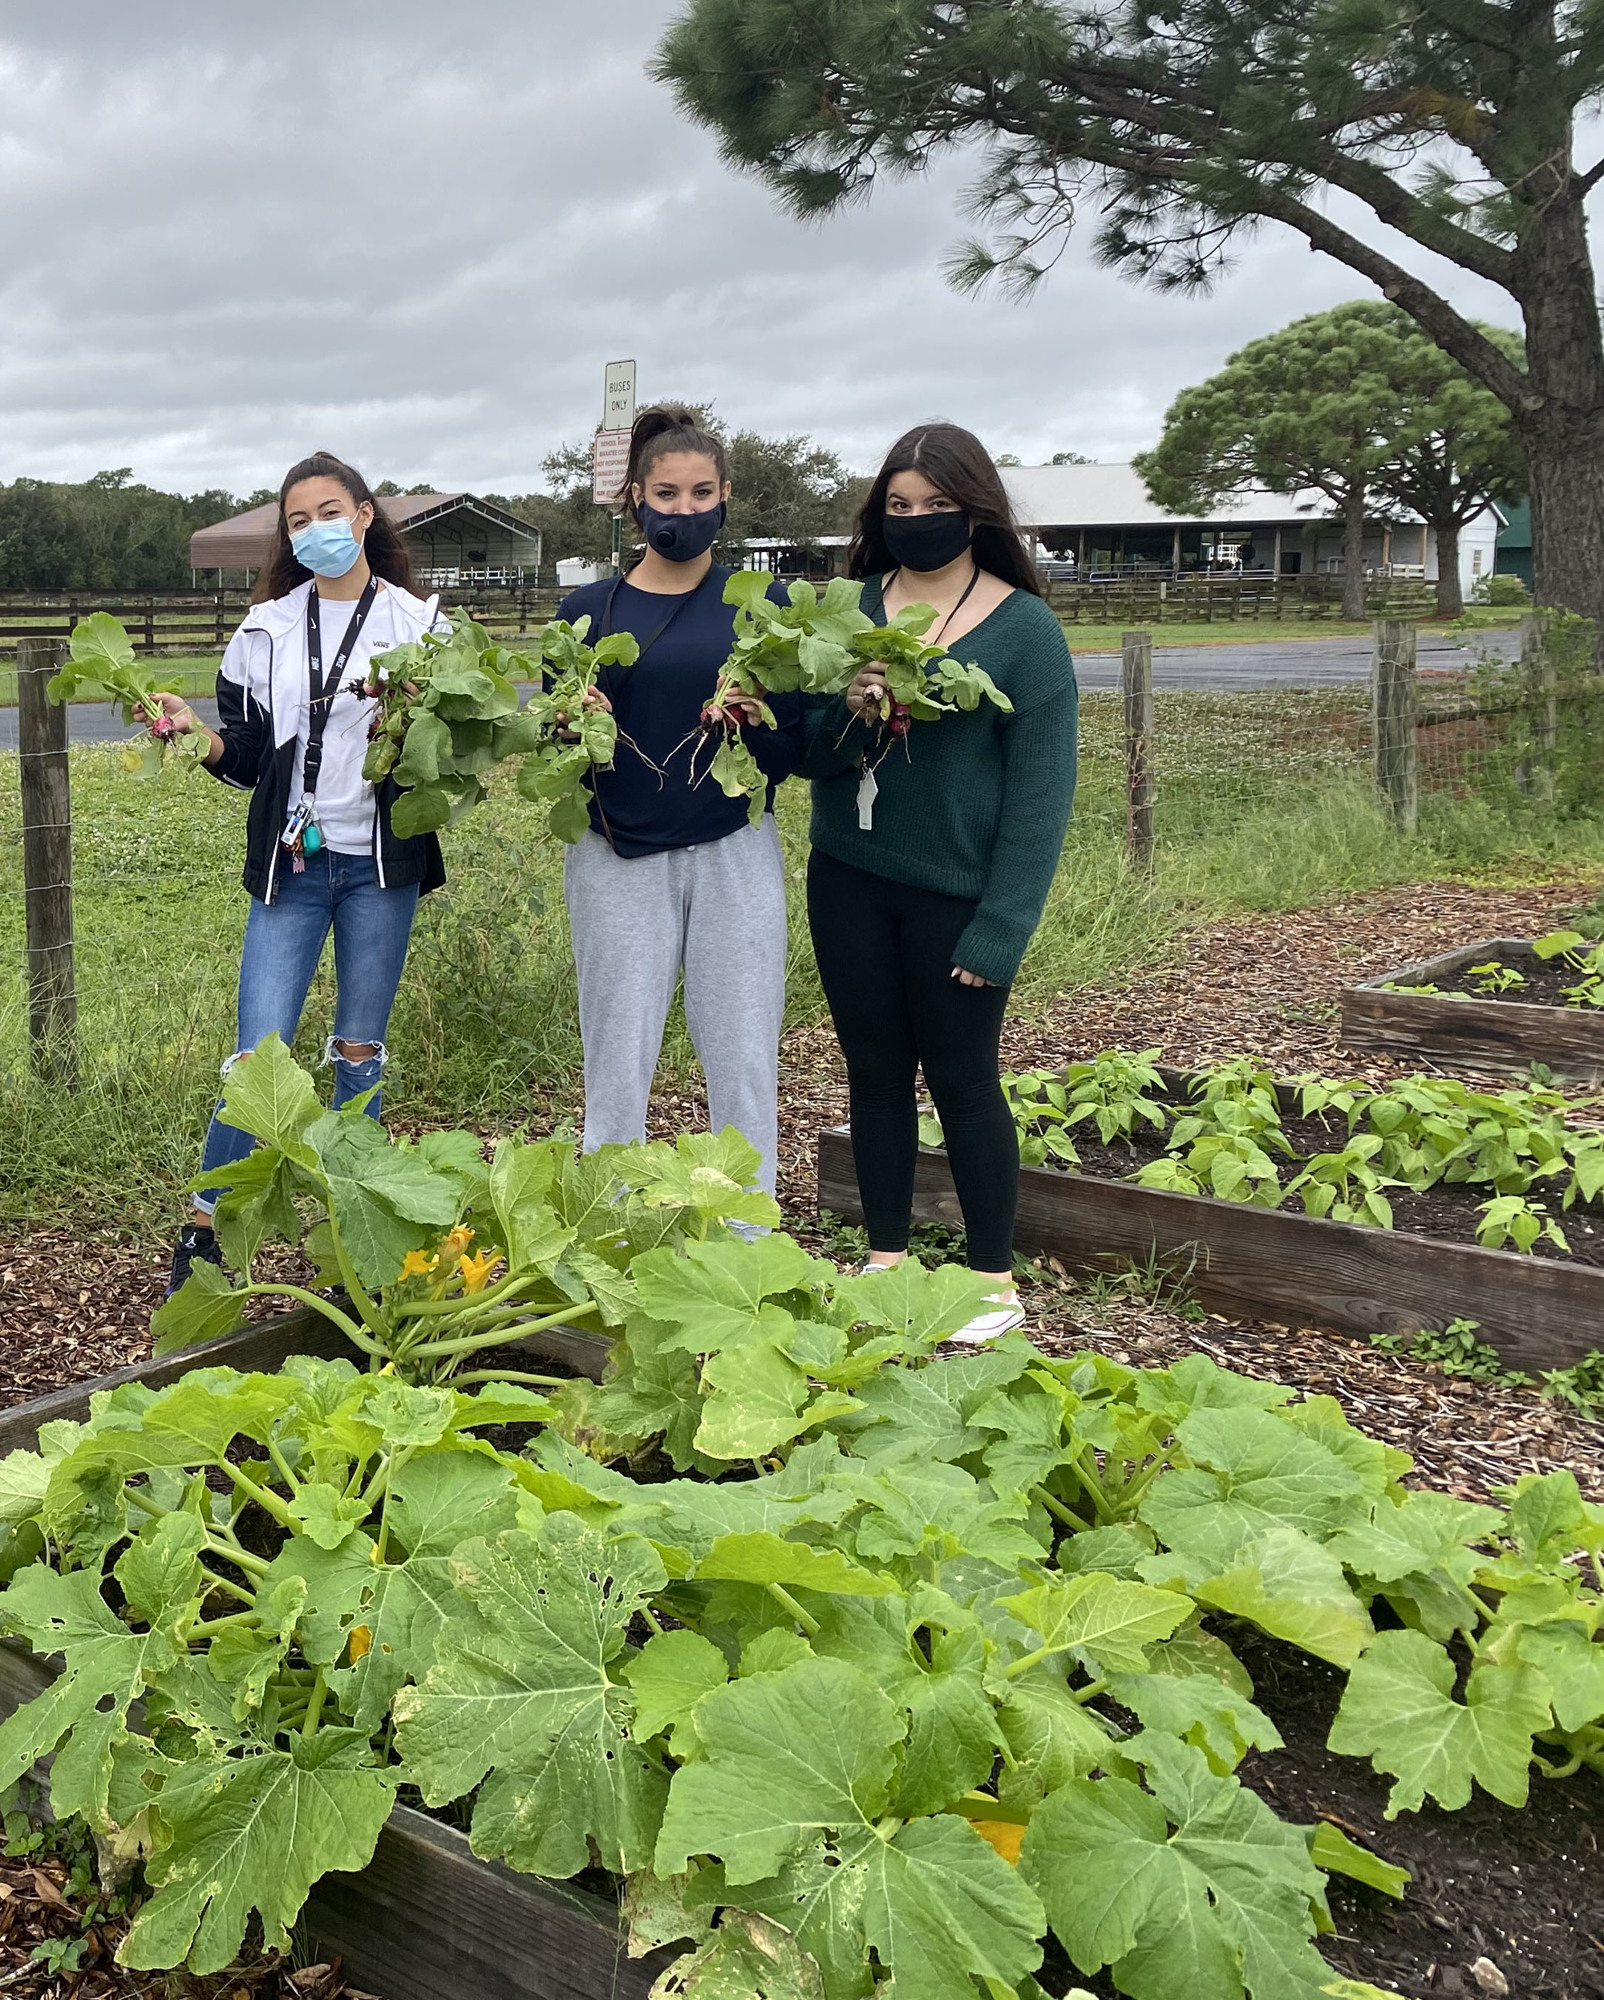 Agriscience Foundations students Madisyn Carsola, Tessa Dinapoli and Valerie Araujo follow Centers for Disease Control and Prevention guidelines while working in the garden. Courtesy photo.